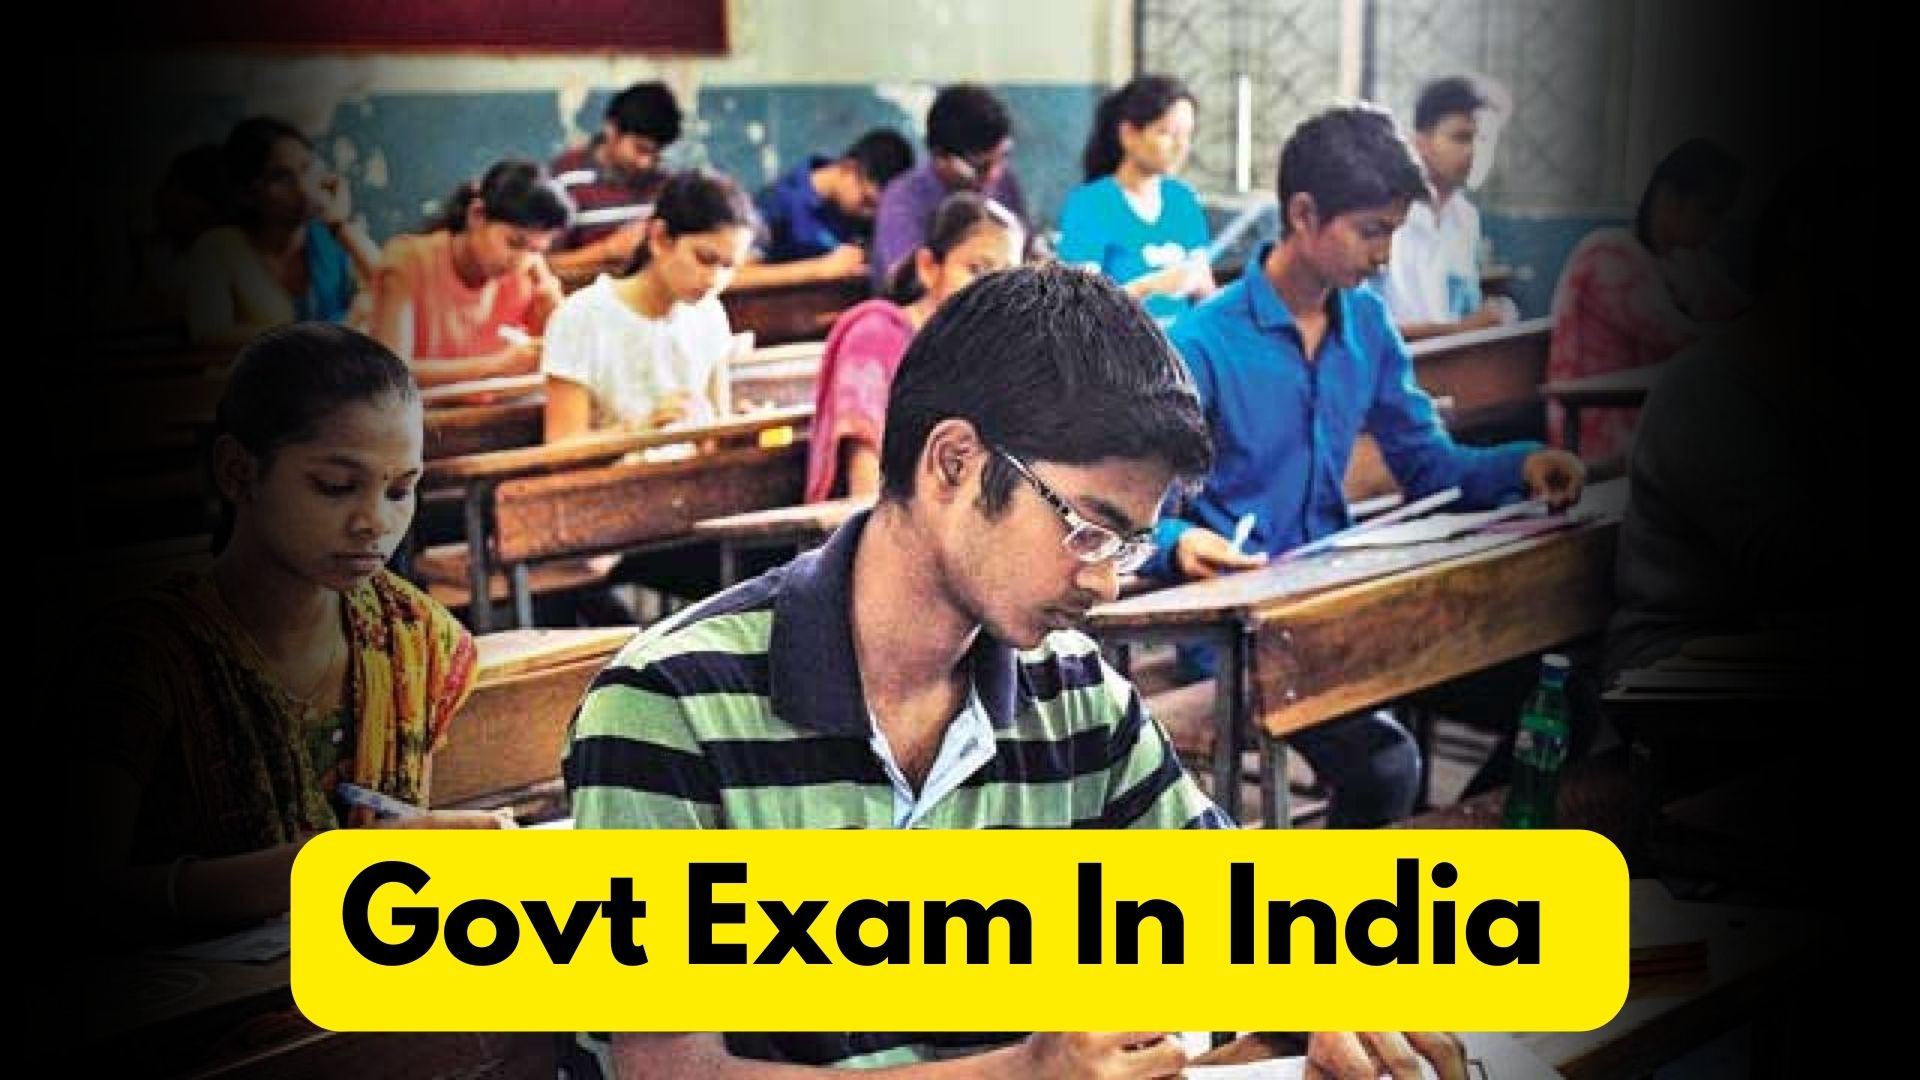 Why Are The Majority Of Indians Obsessed With Government Exams?